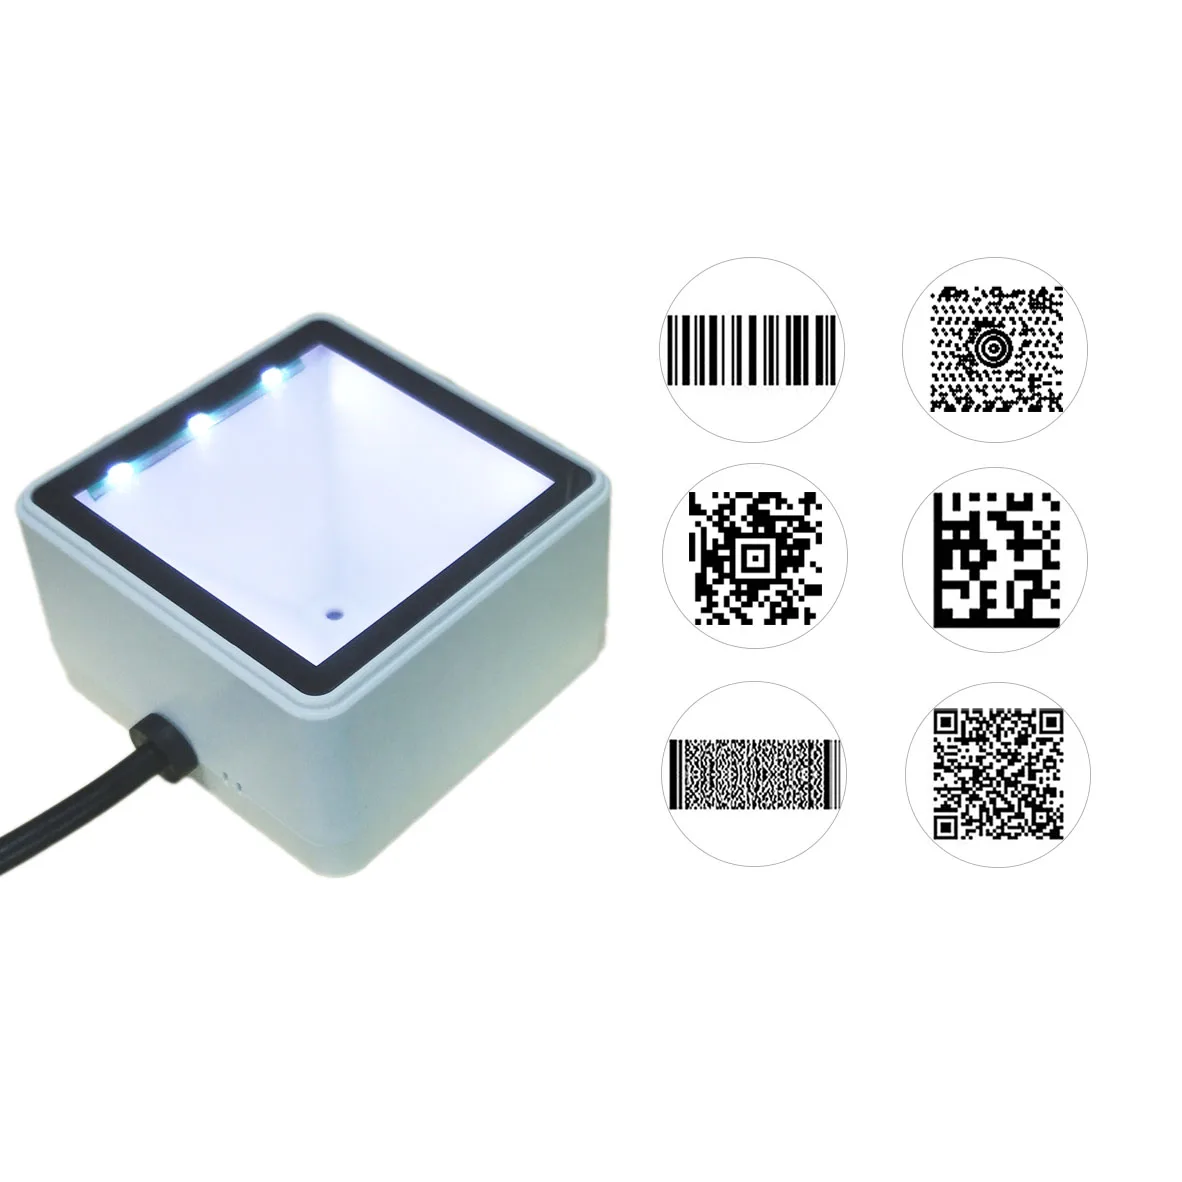 TEKLEAD USB Barcode Scanner 2D MIni QR Code Reader Automatic Scan Module for Mobile Payment Self-service Cinema Ticket Machine